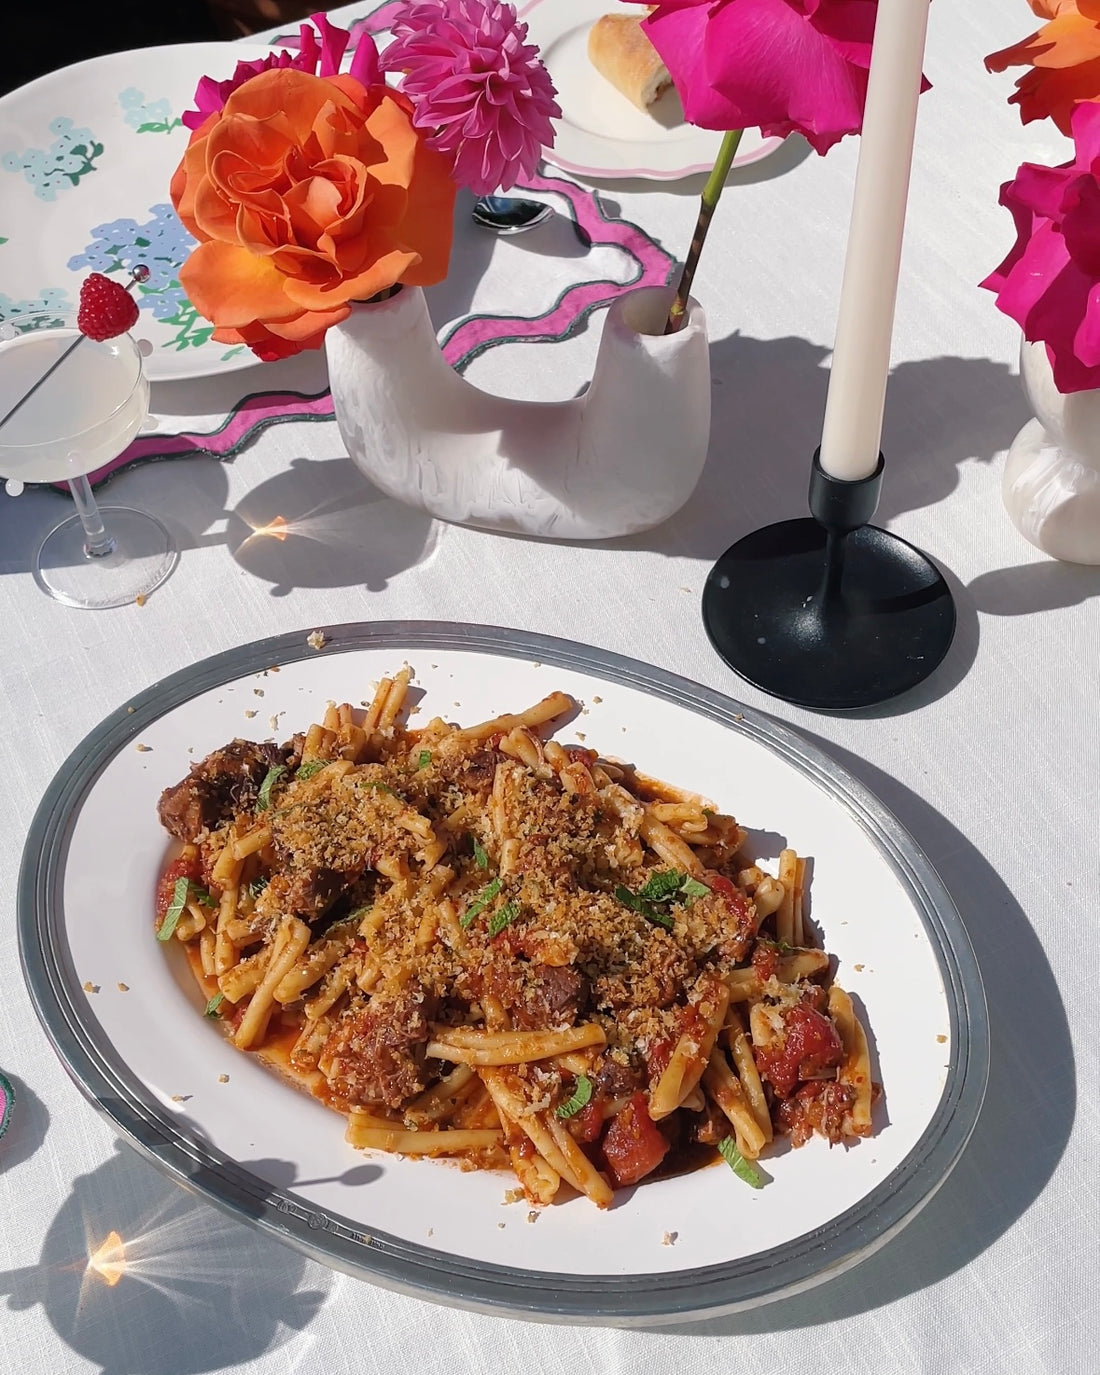 The image on the left is a plate of lamb ragu on an outdoor table setting, on the right are the ingredients used. @intothesauce, Into the Sauce, Tori Falzon, #intothesauce